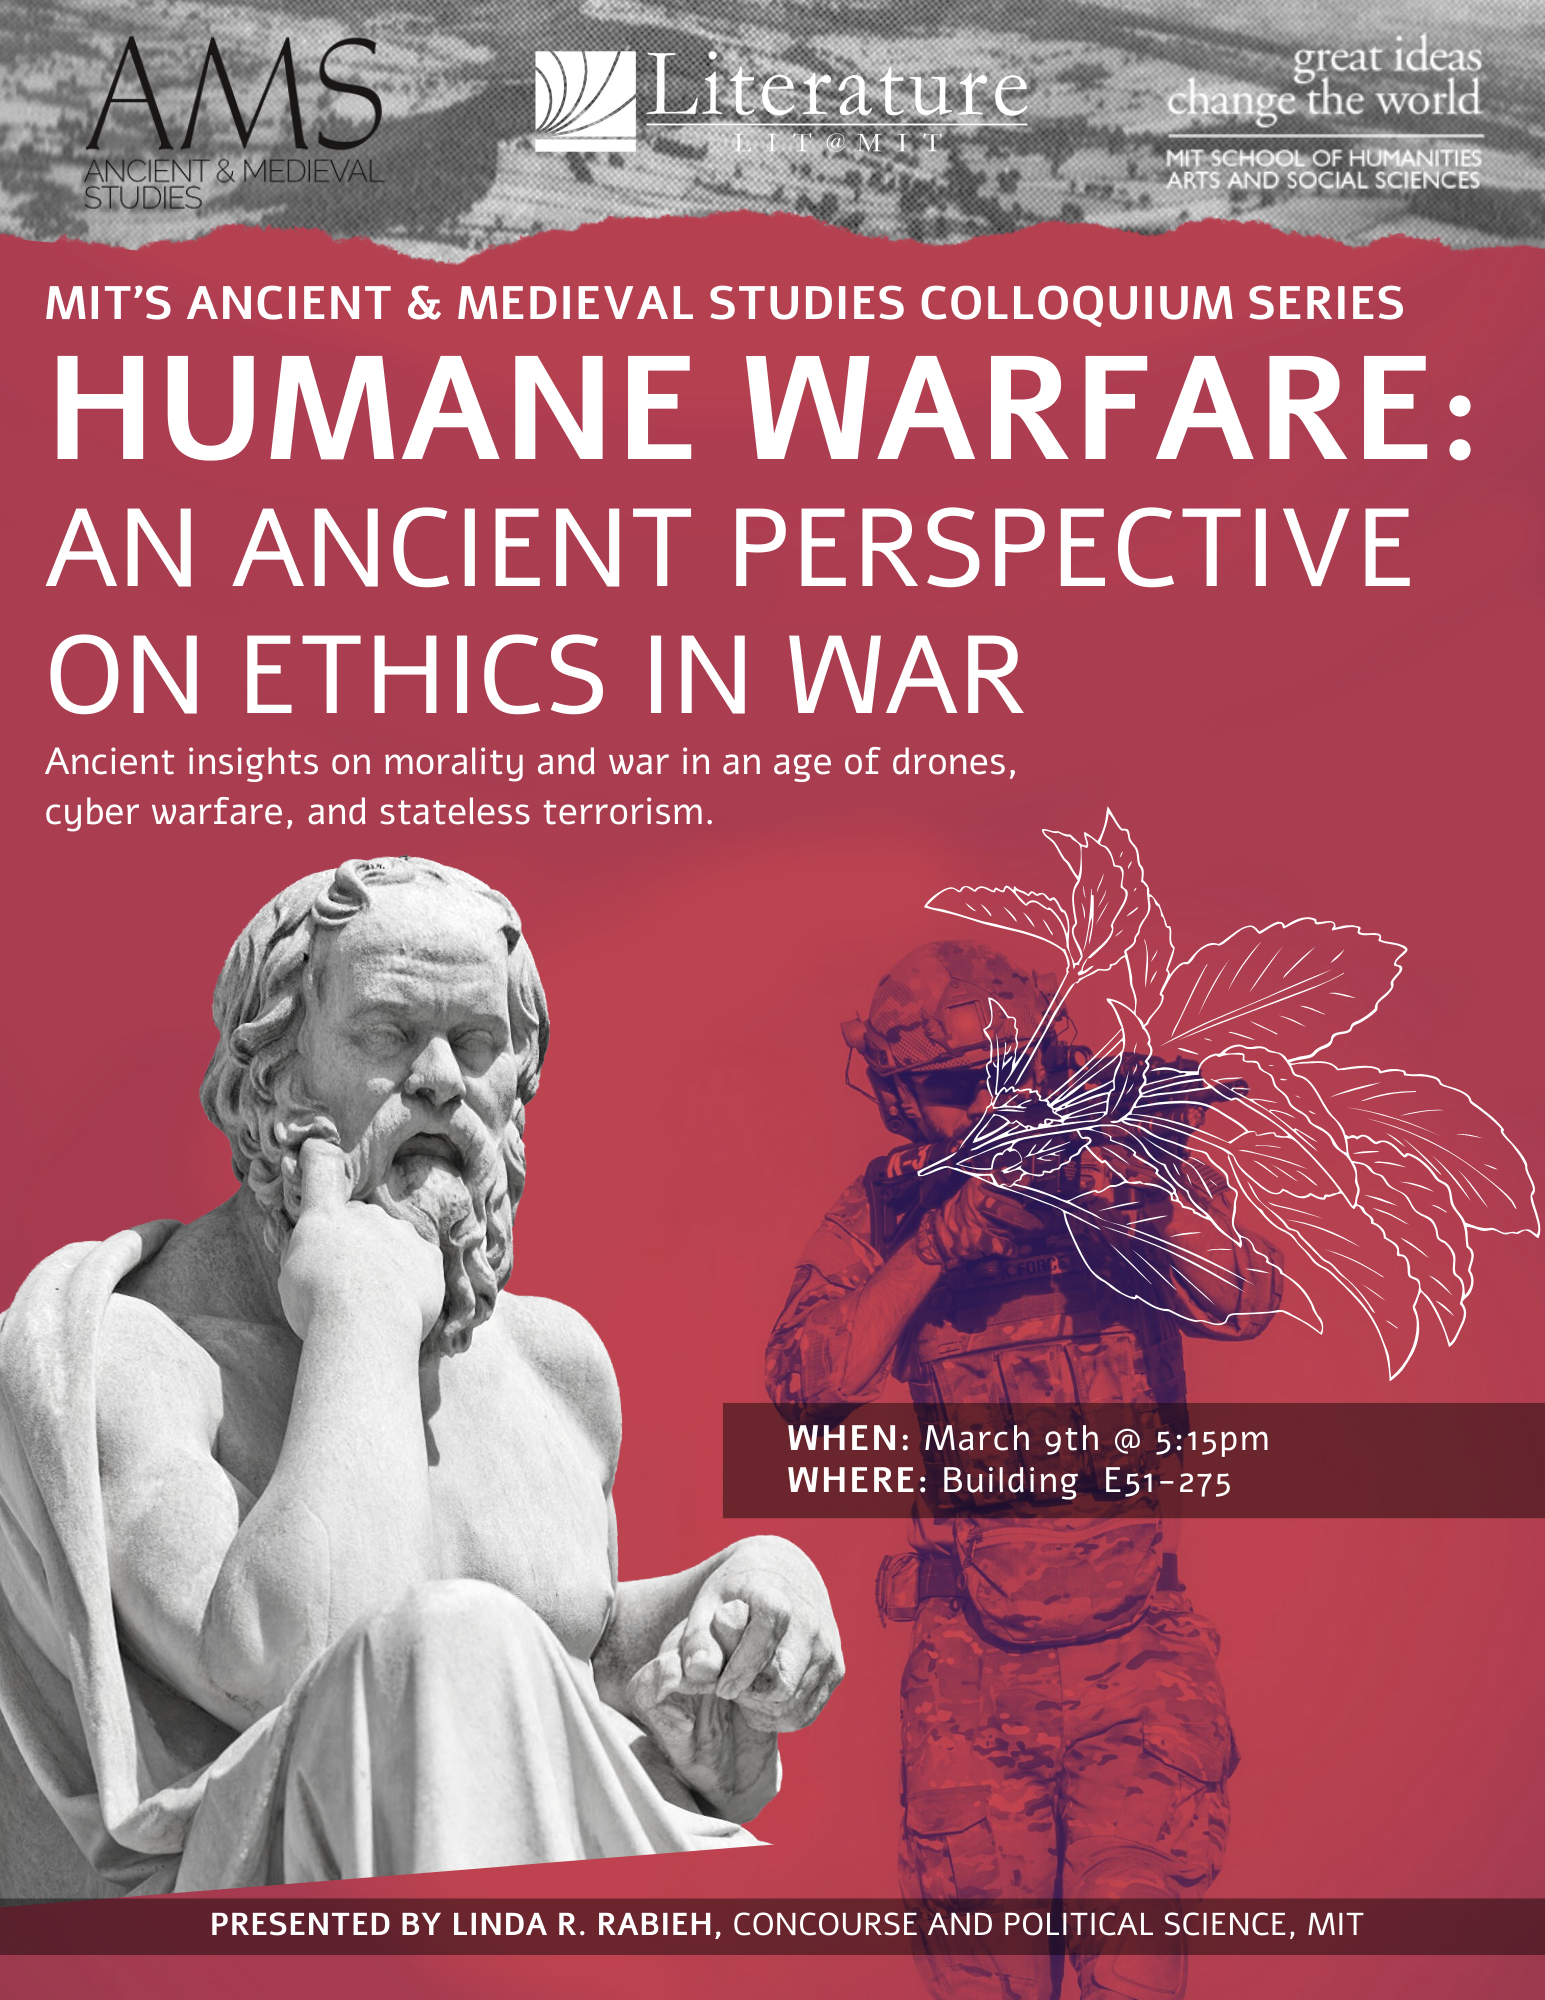 Humane Warfare: An Ancient Perspective on Ethics in War